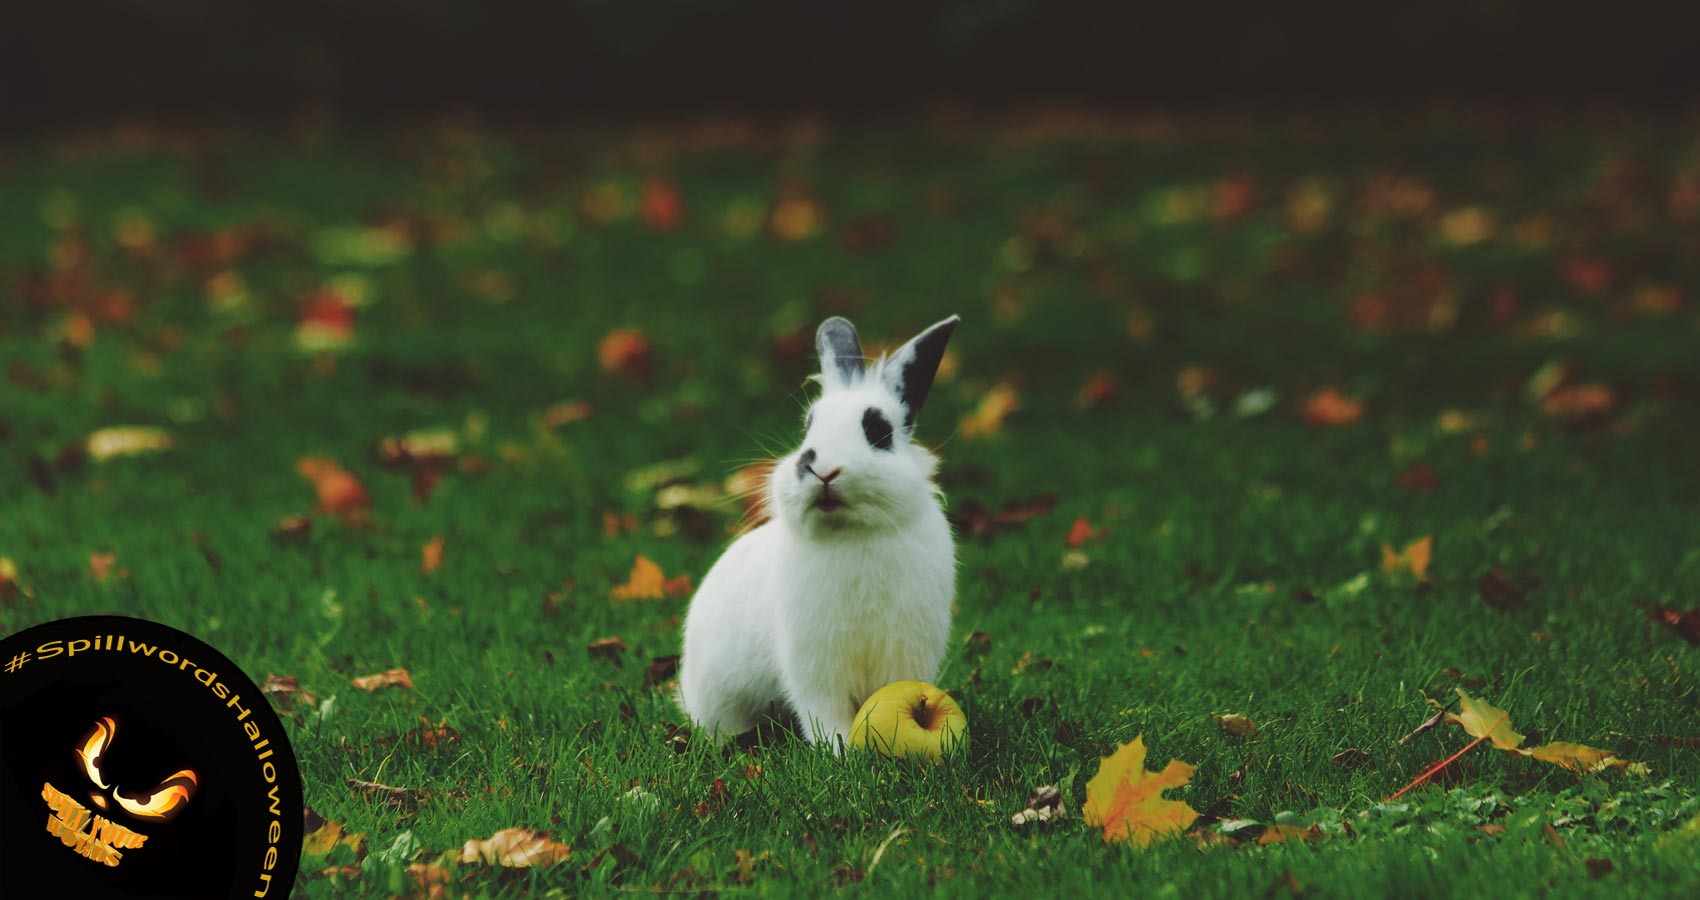 The Rabbit, flash fiction by Karen Southall Watts at Spillwords.com